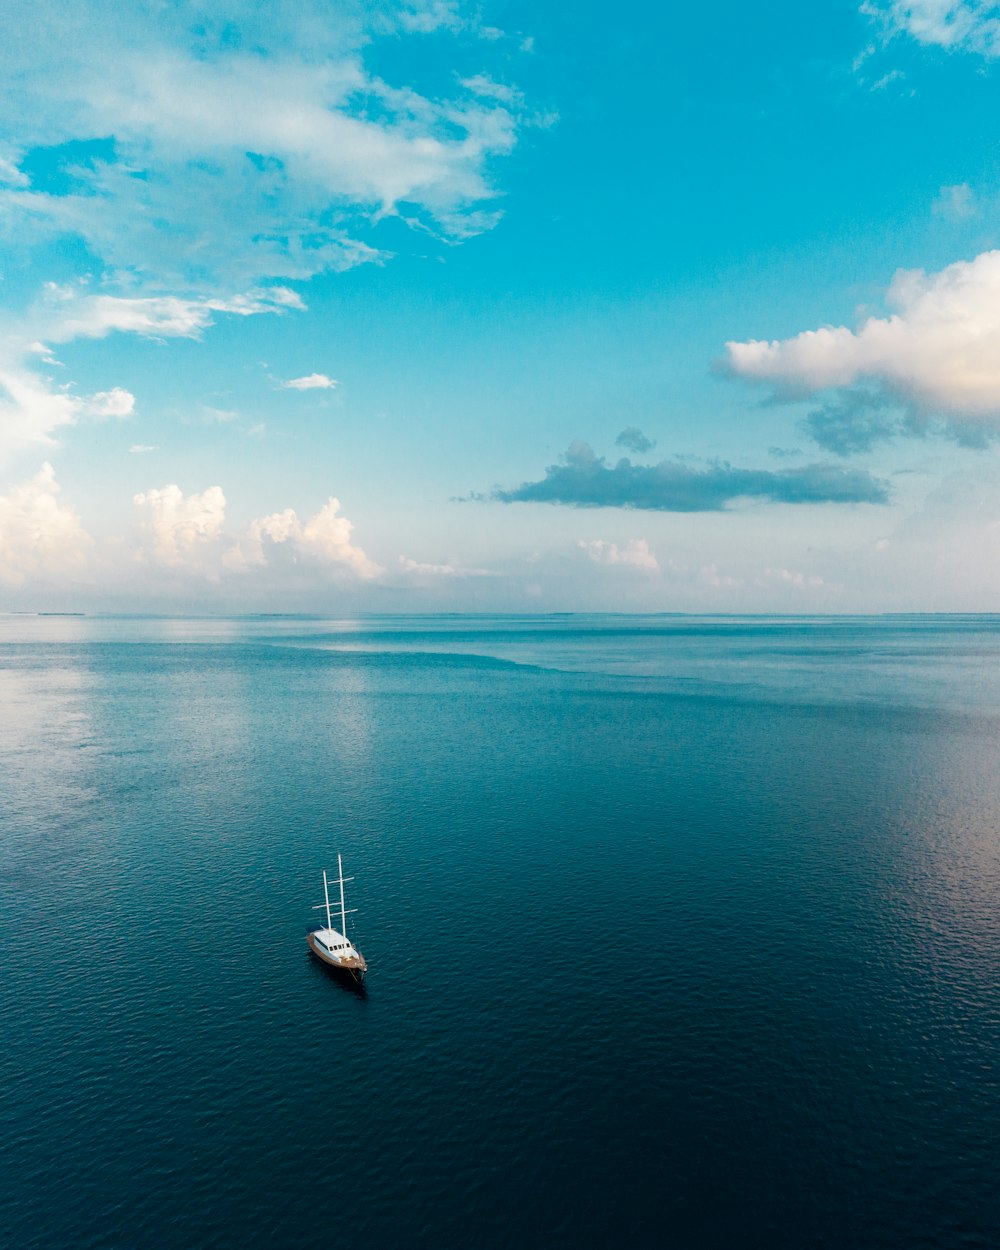 white boat on blue sea under blue sky and white clouds during daytime